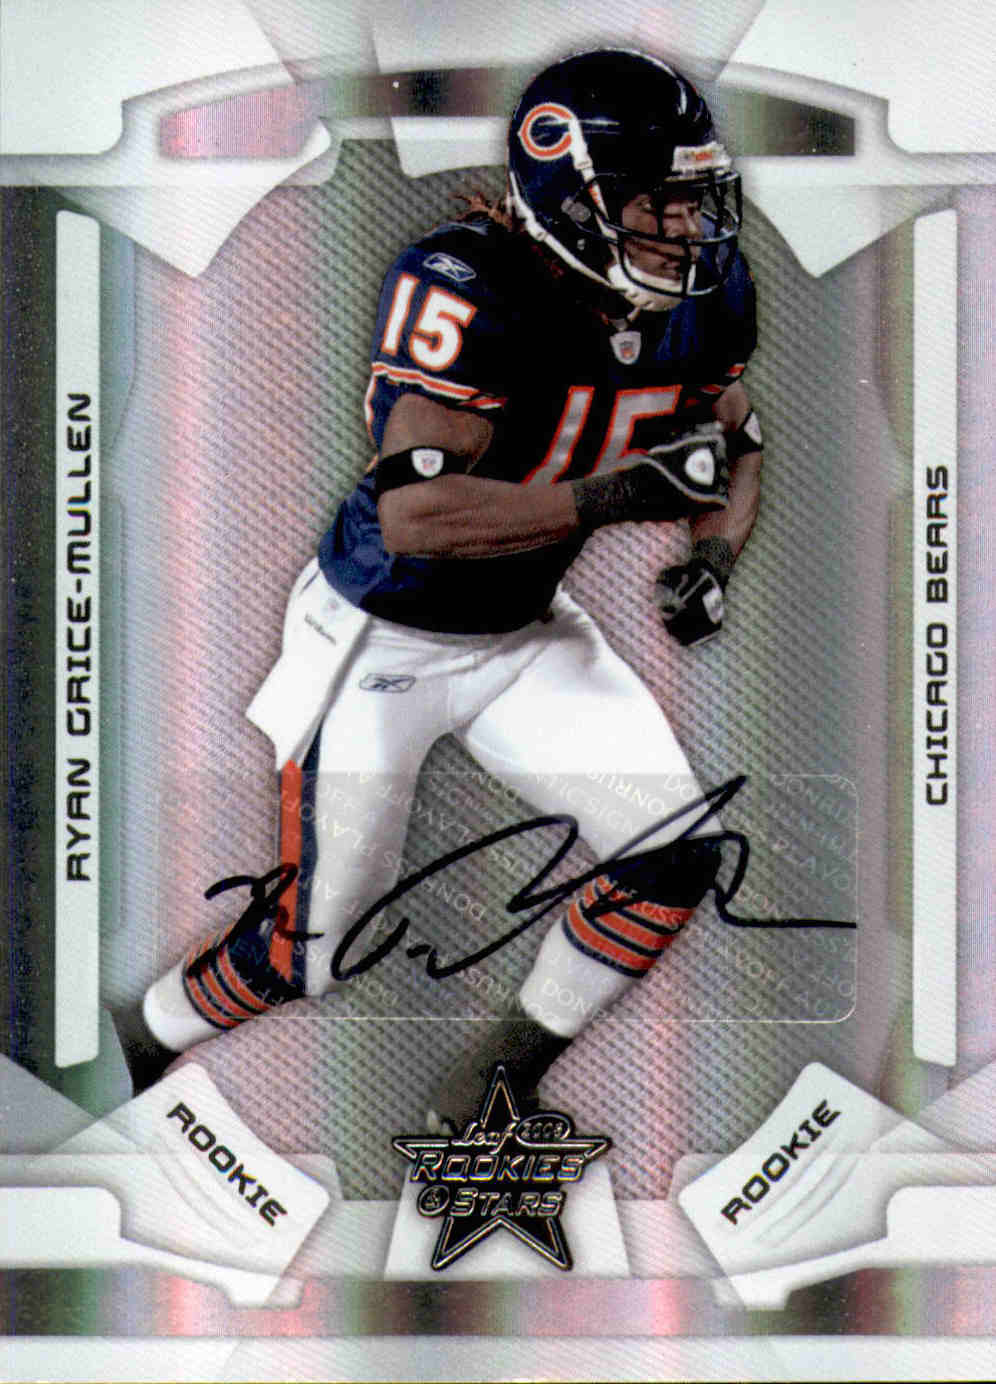 2008 Leaf Rookies and Stars Rookie Autographs Holofoil #173 Ryan Grice-Mullen/250